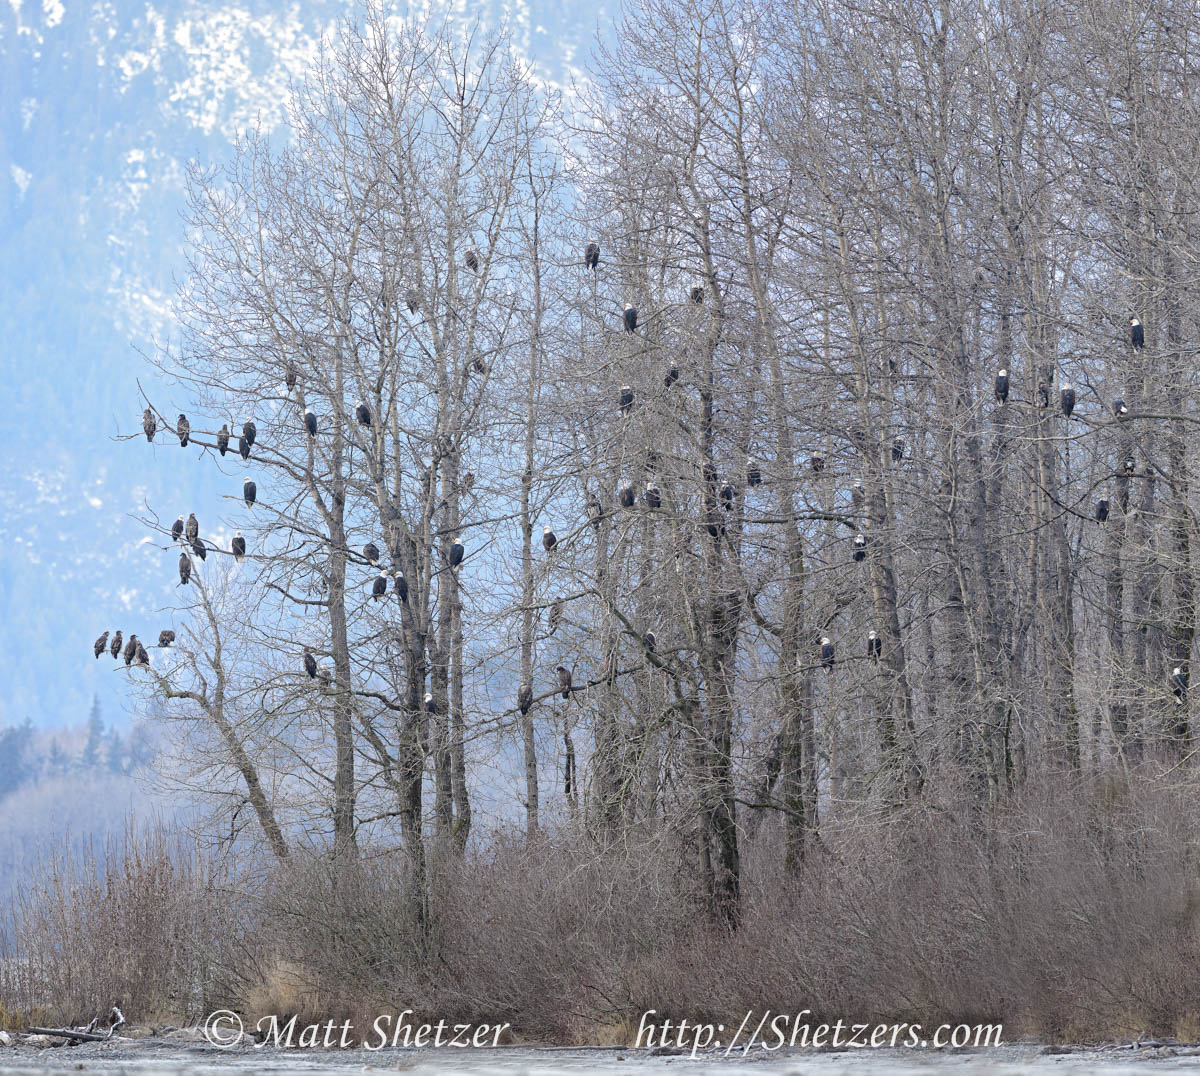 The most eagles I have ever seen in the trees at one location this year. How many bald eagles can you count?